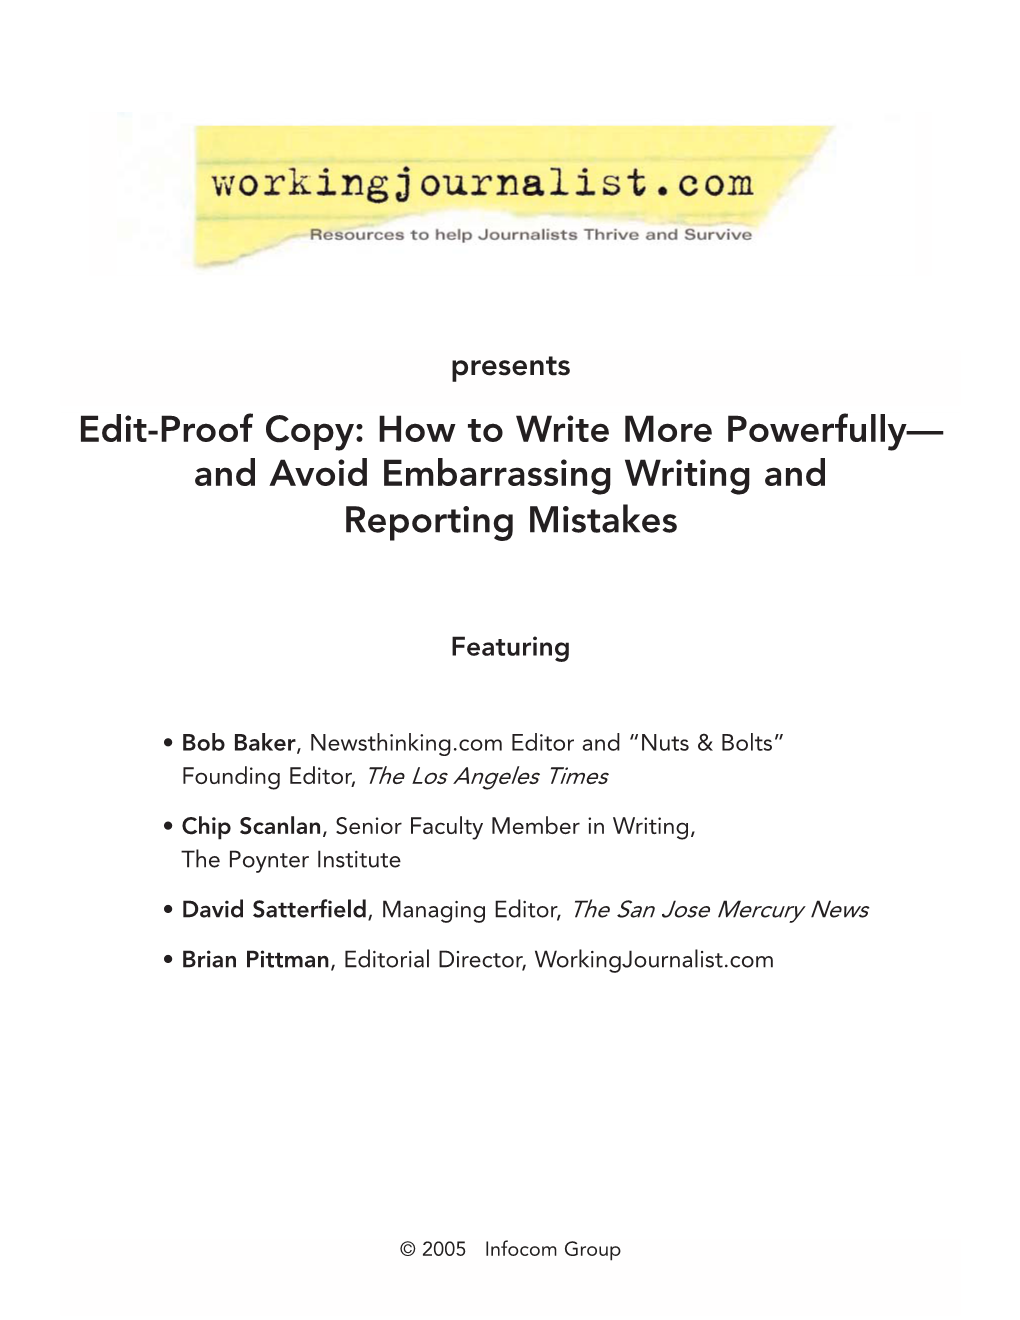 Edit-Proof Copy: How to Write More Powerfully— and Avoid Embarrassing Writing and Reporting Mistakes